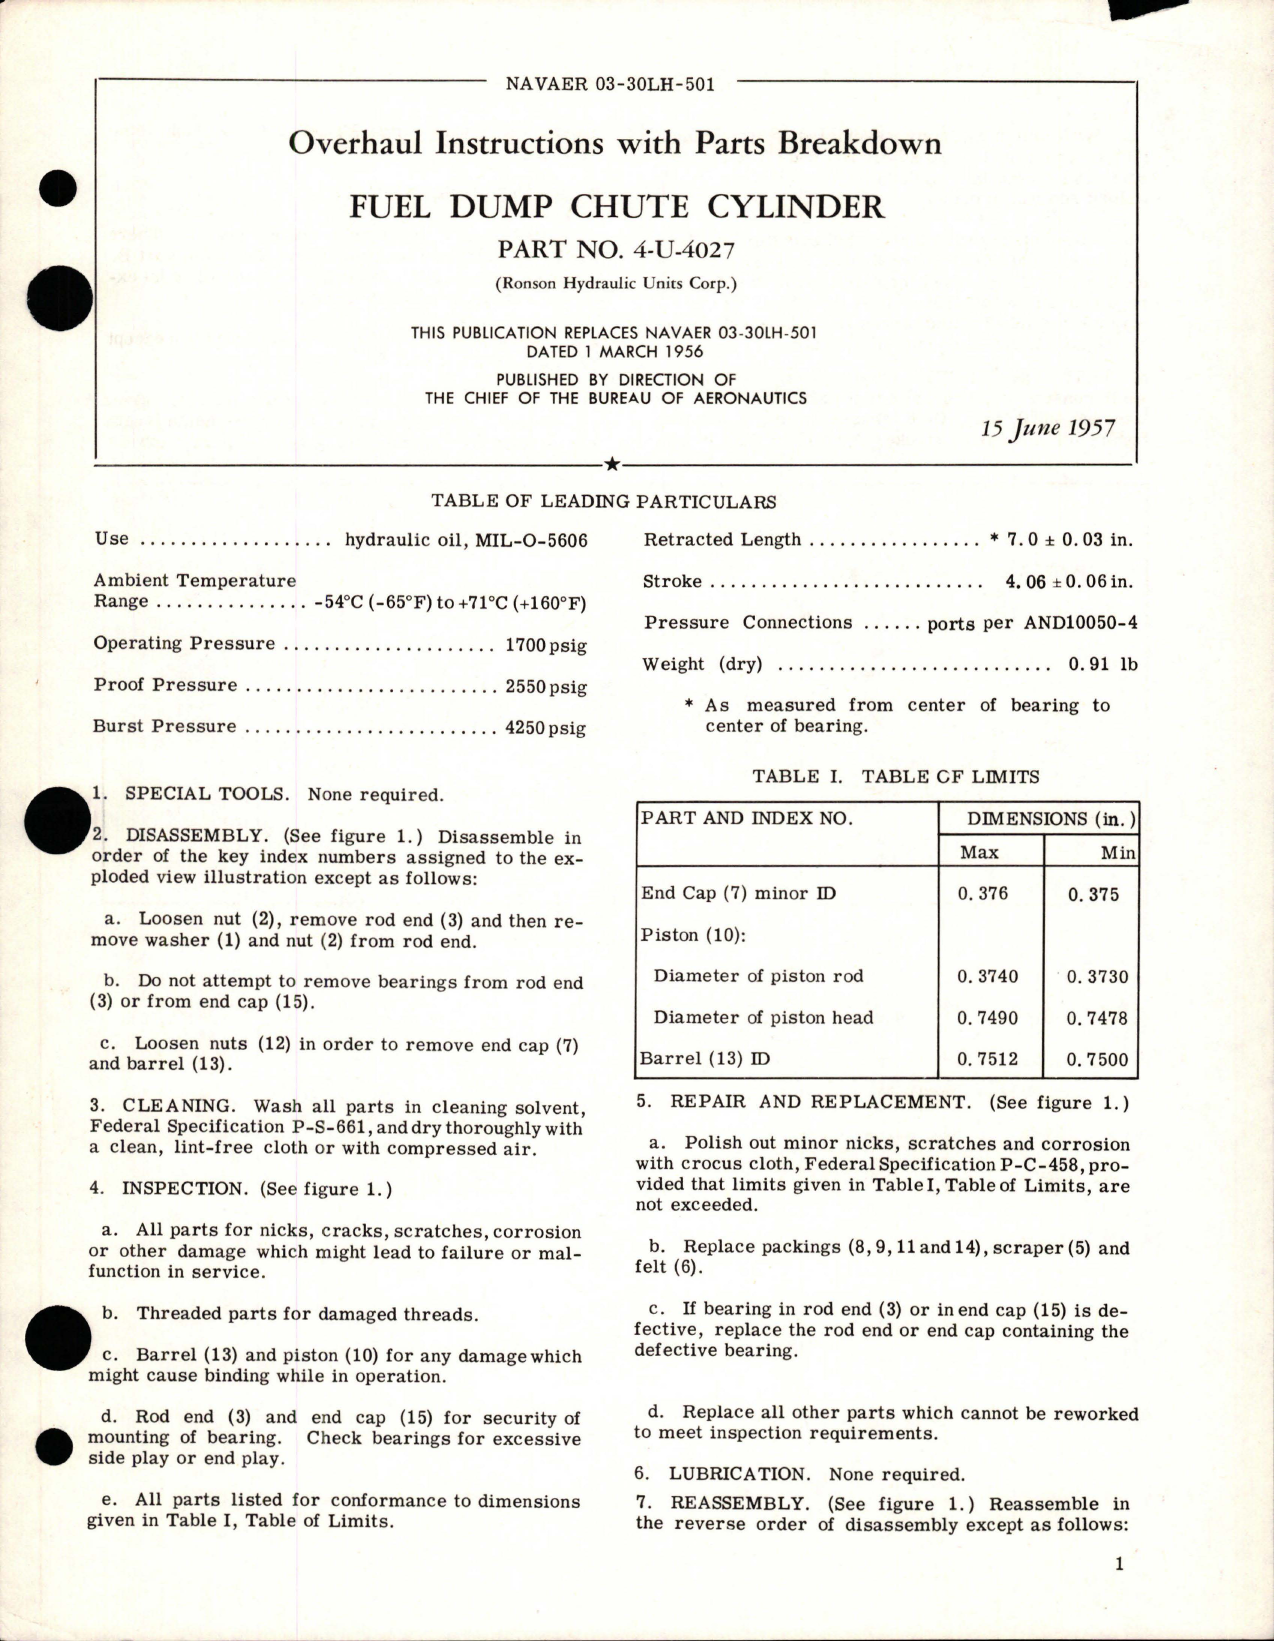 Sample page 1 from AirCorps Library document: Overhaul Instructions with Parts Breakdown for Fuel Dump Chute Cylinder - Part 4-U-4027